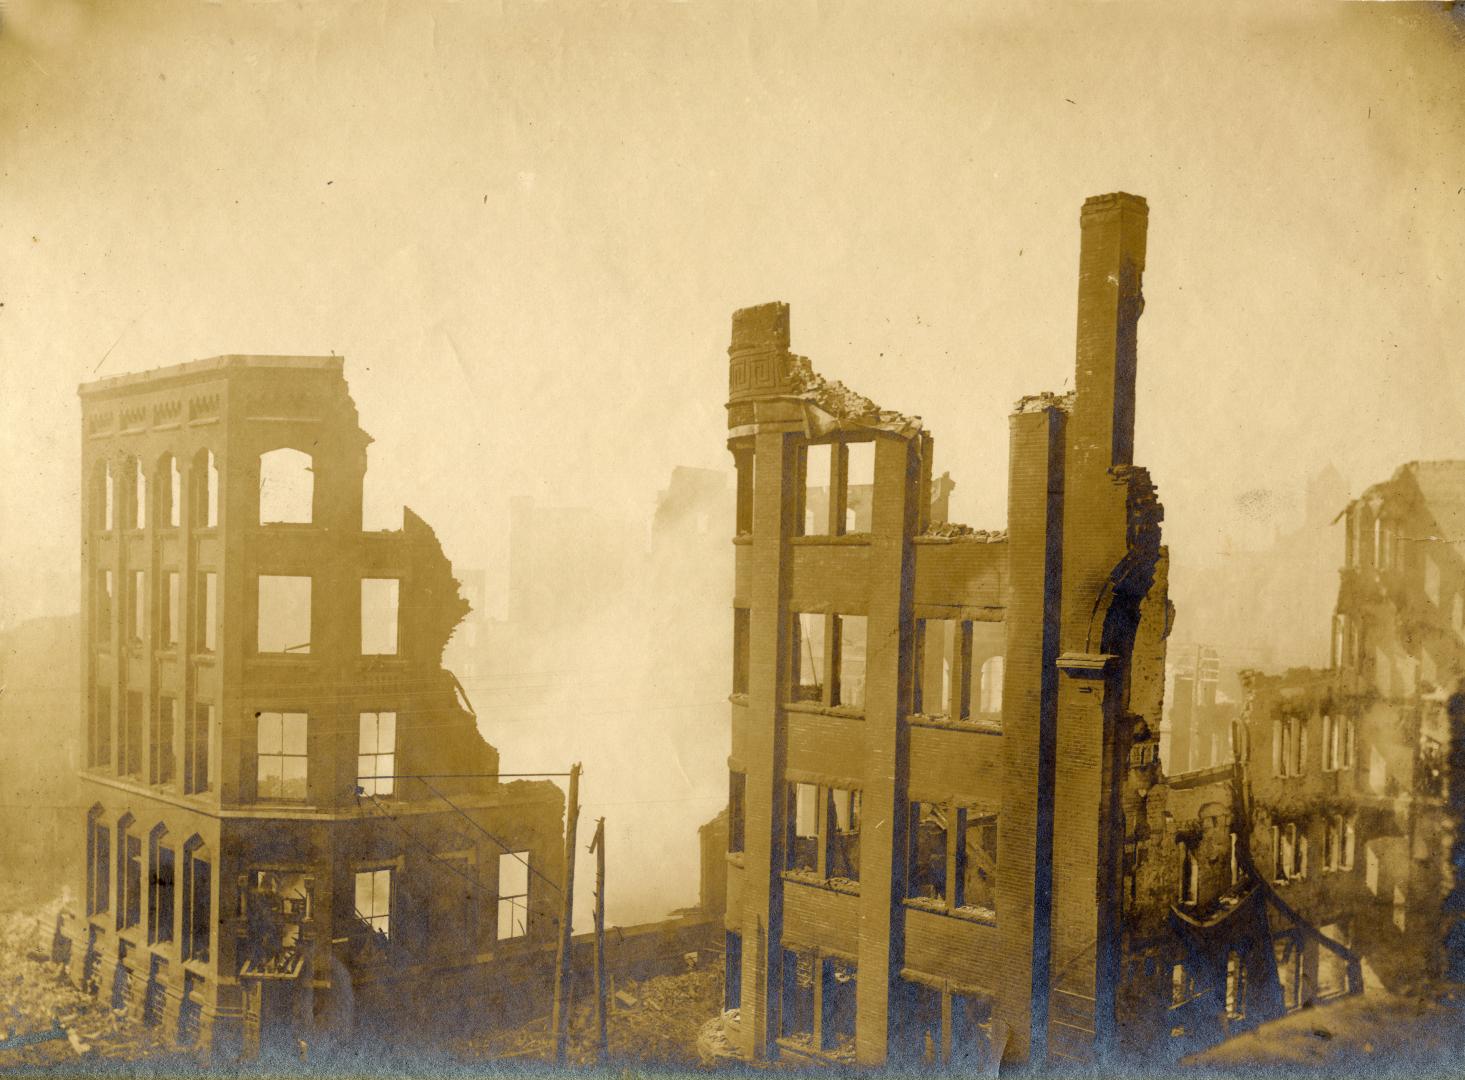 Fire (1904), Bay St., west side, looking s.west from north of Wellington St. West, Toronto, Ontario